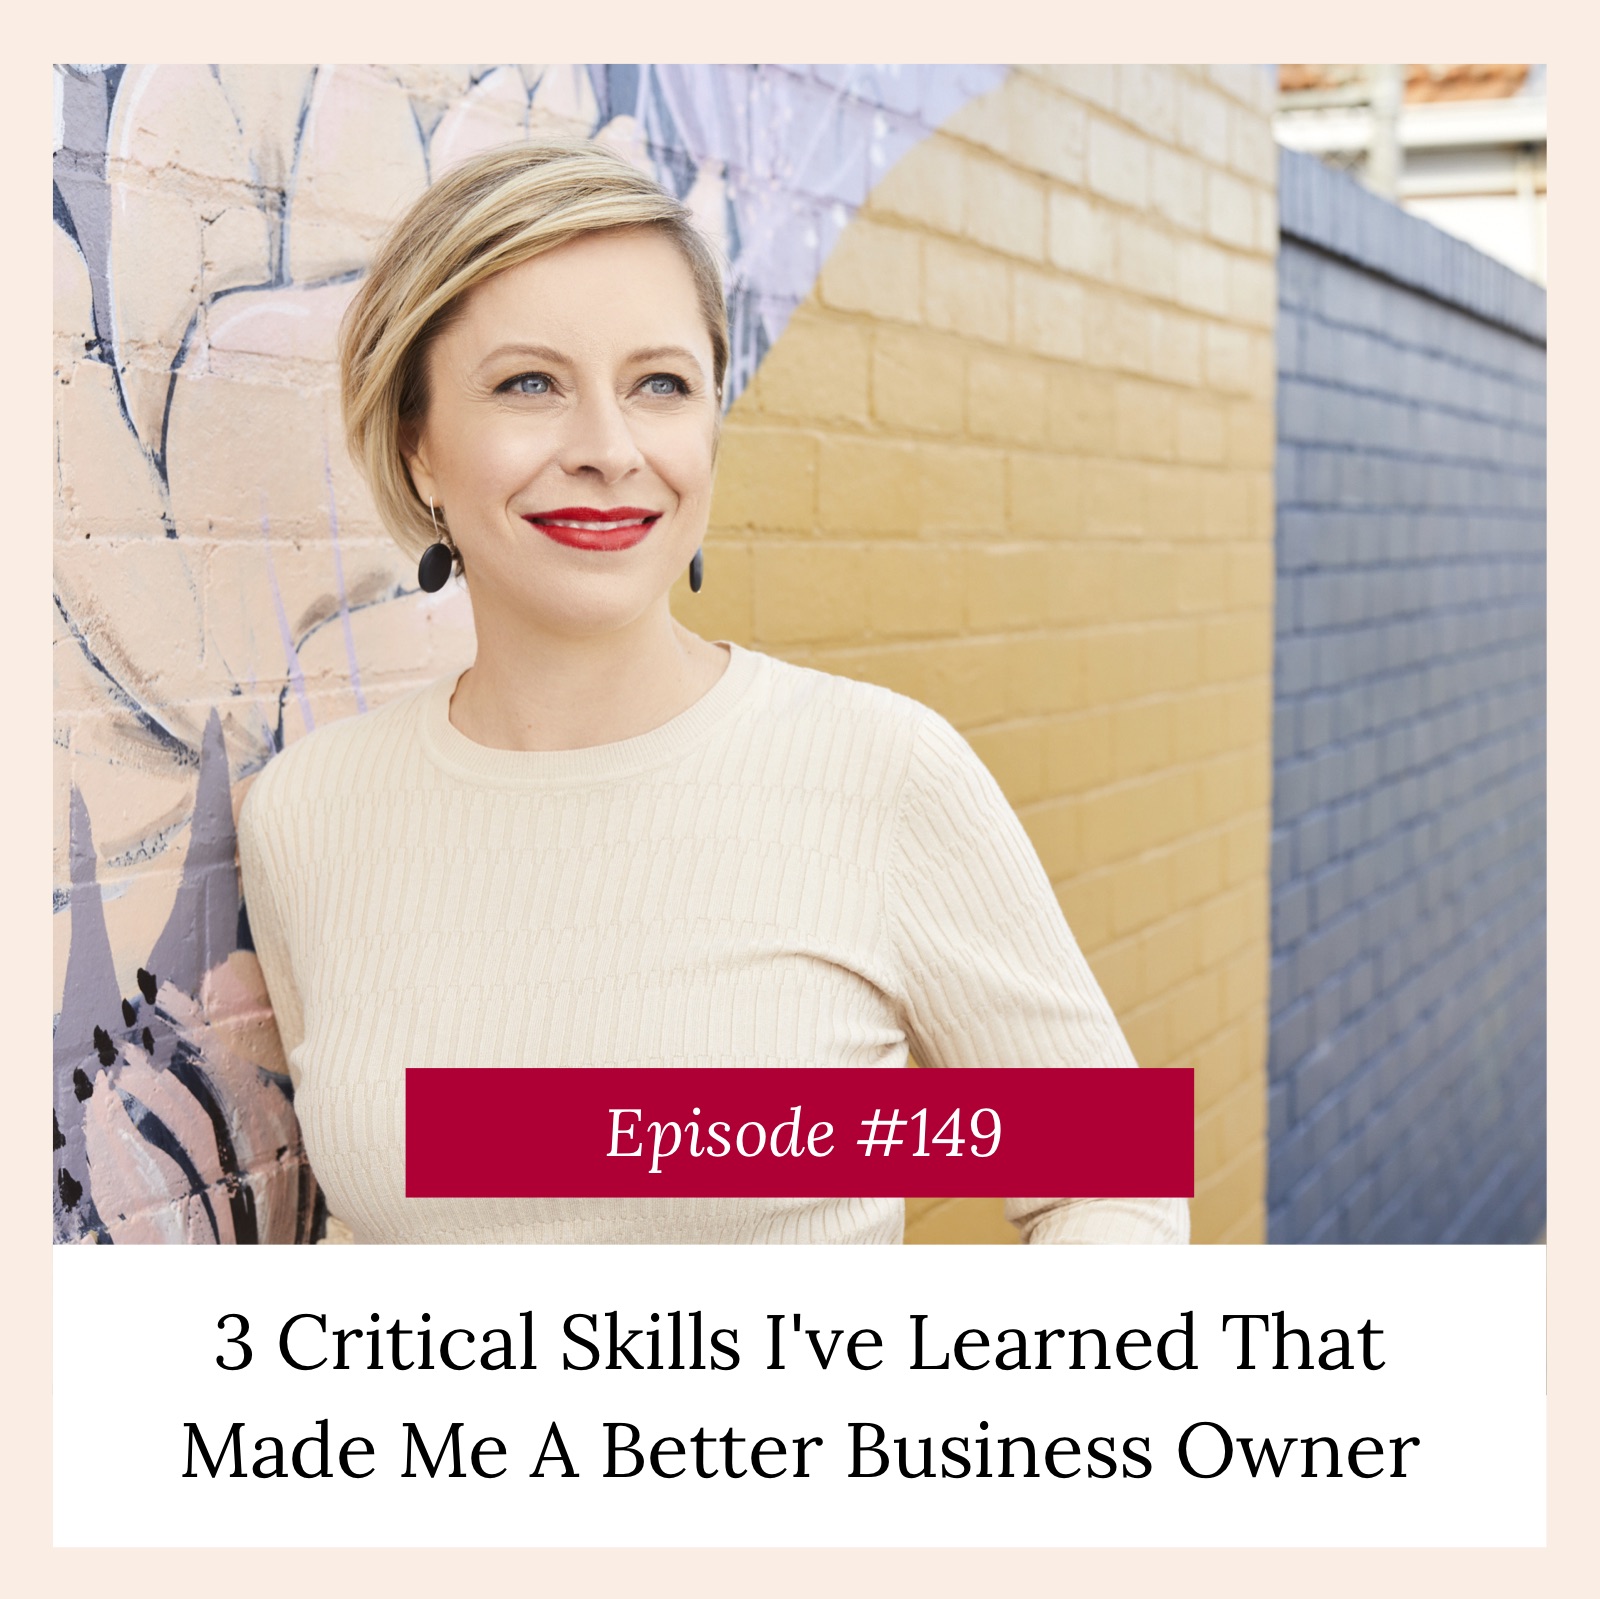 Critical skills for a business owner